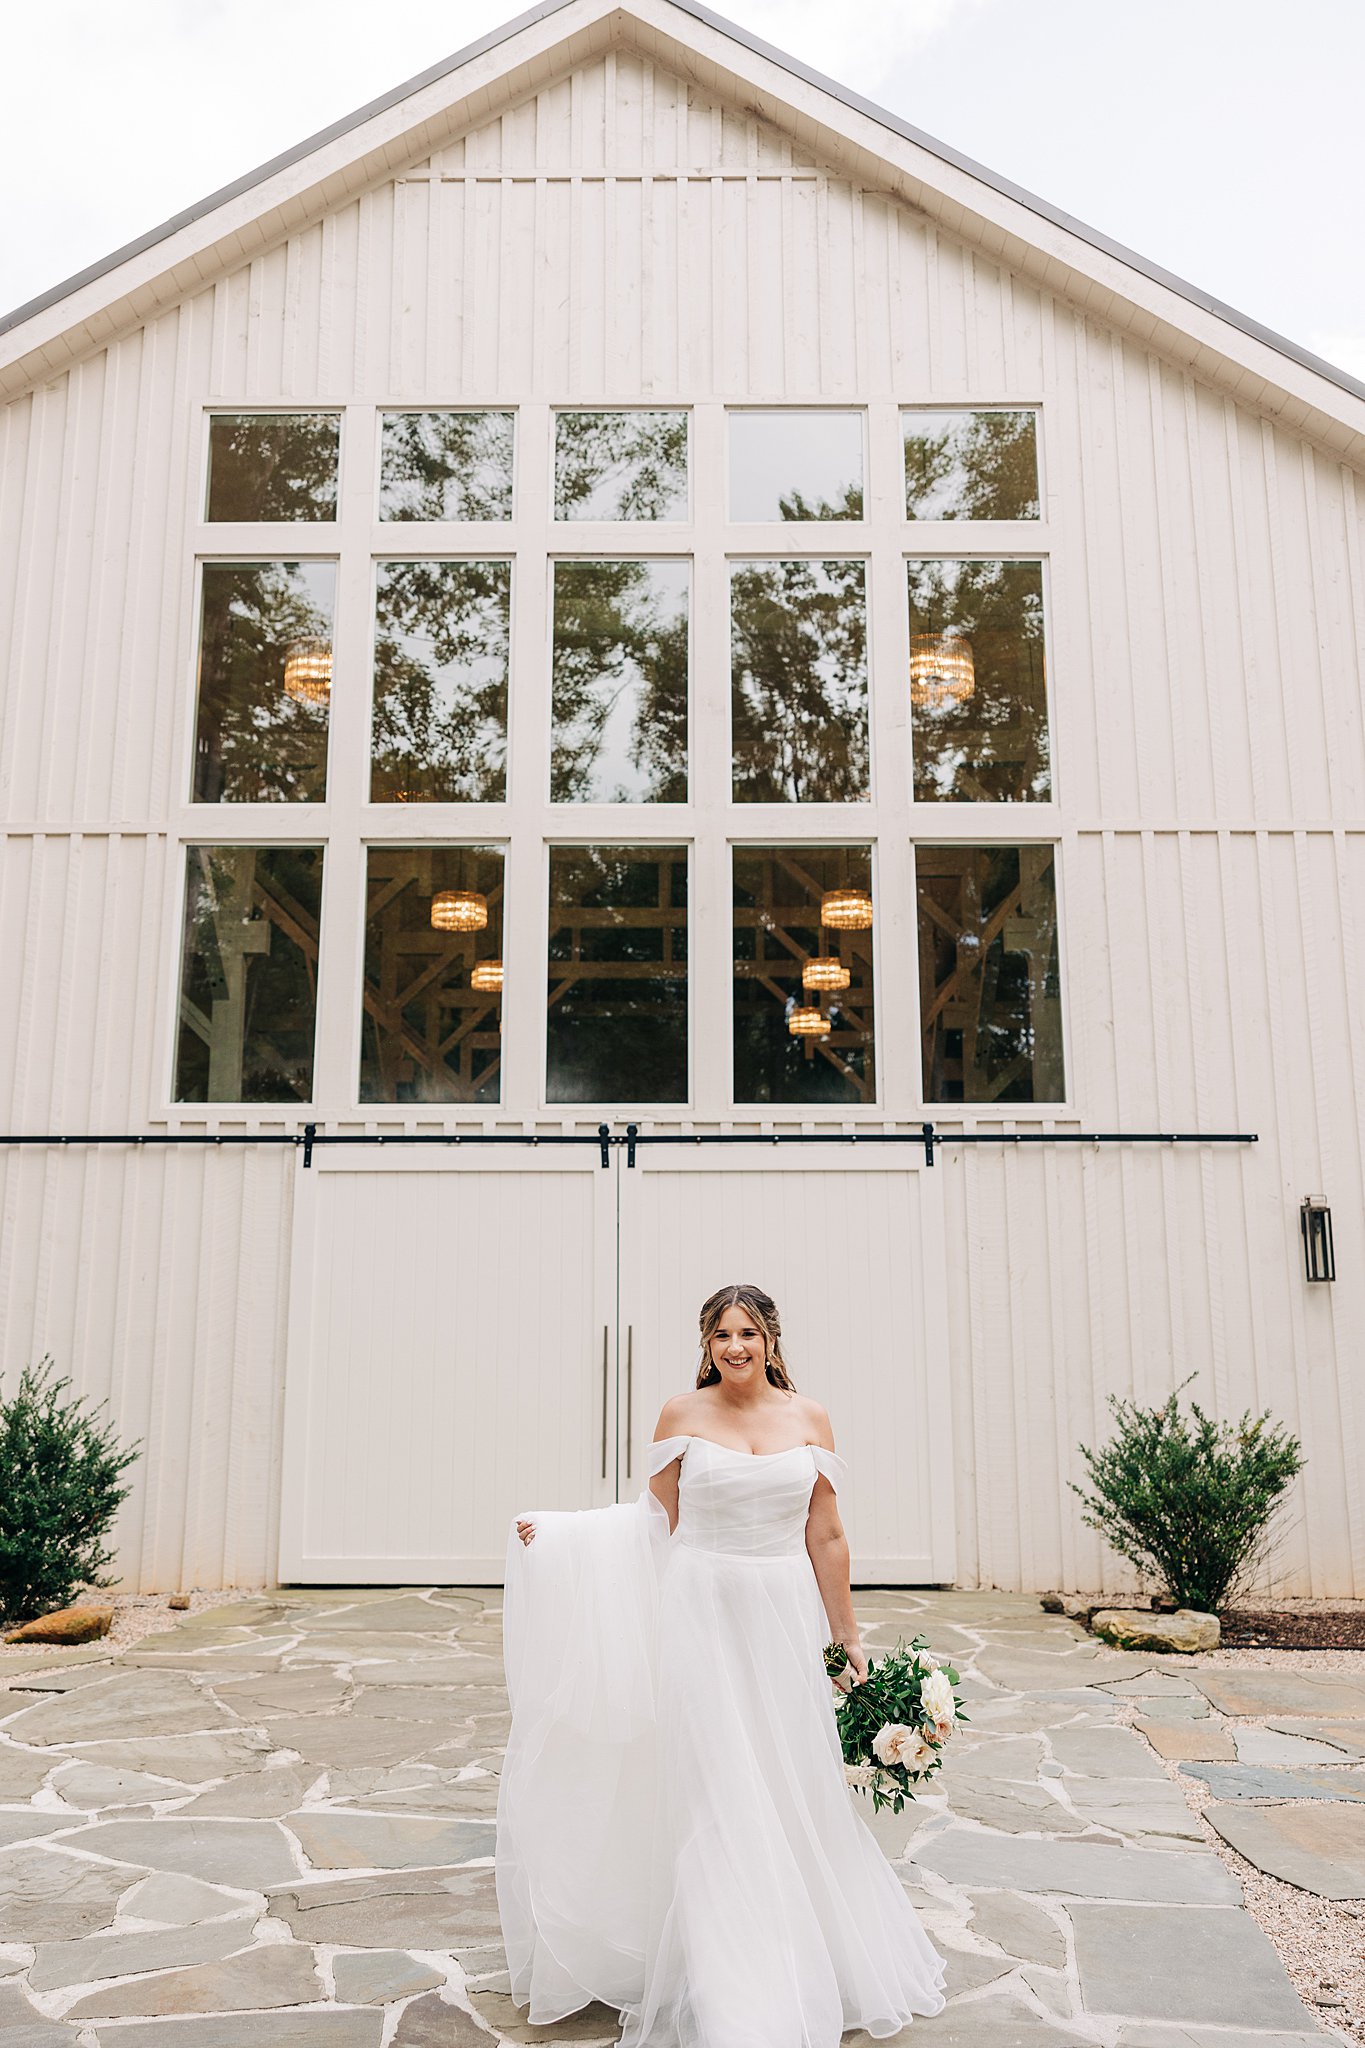 A bride holds her long train while walking on the stone patio at the carolina grove wedding venue